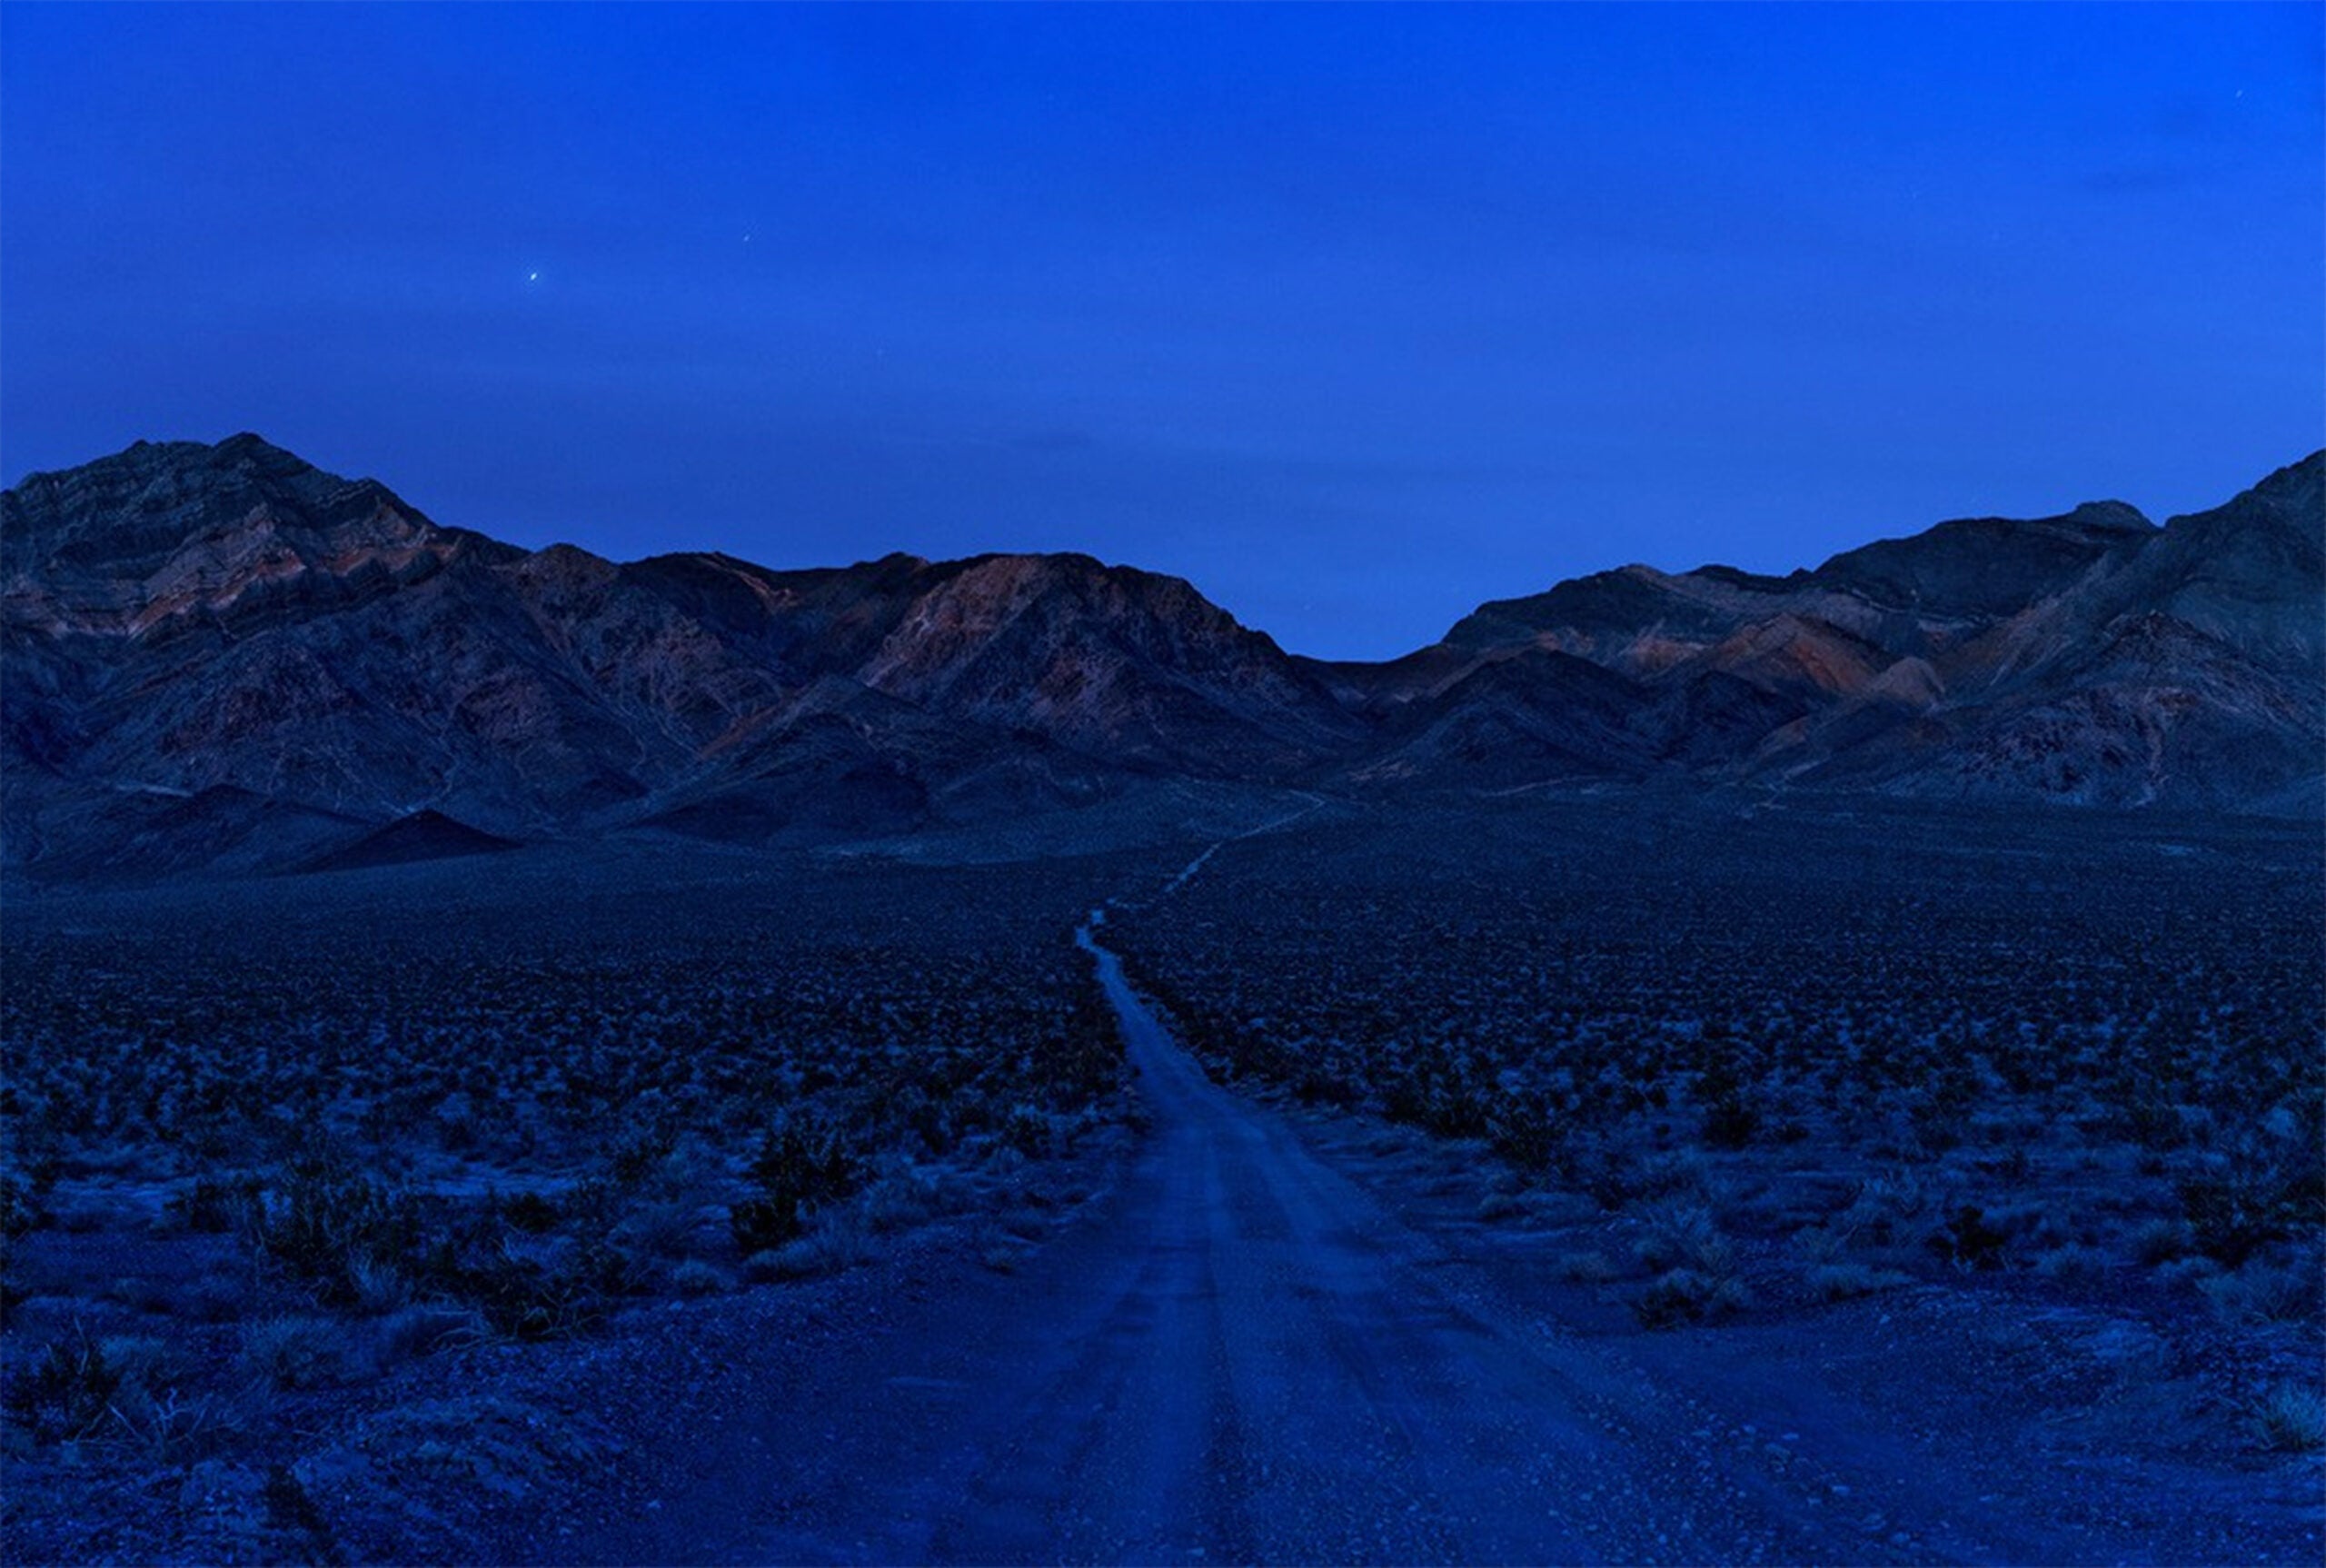 “Mountain range surrounding the Nevada Test Site, November, 2017.” Photography by Sim Chi Yin, Singaporean (b. Singapore 1978). From the series “Most People Were Silent.” Archival pigment print. Harvard Art Museums/Fogg Museum, Richard and Ronay Menschel Fund for the Acquisition of Photographs, 2020.181.